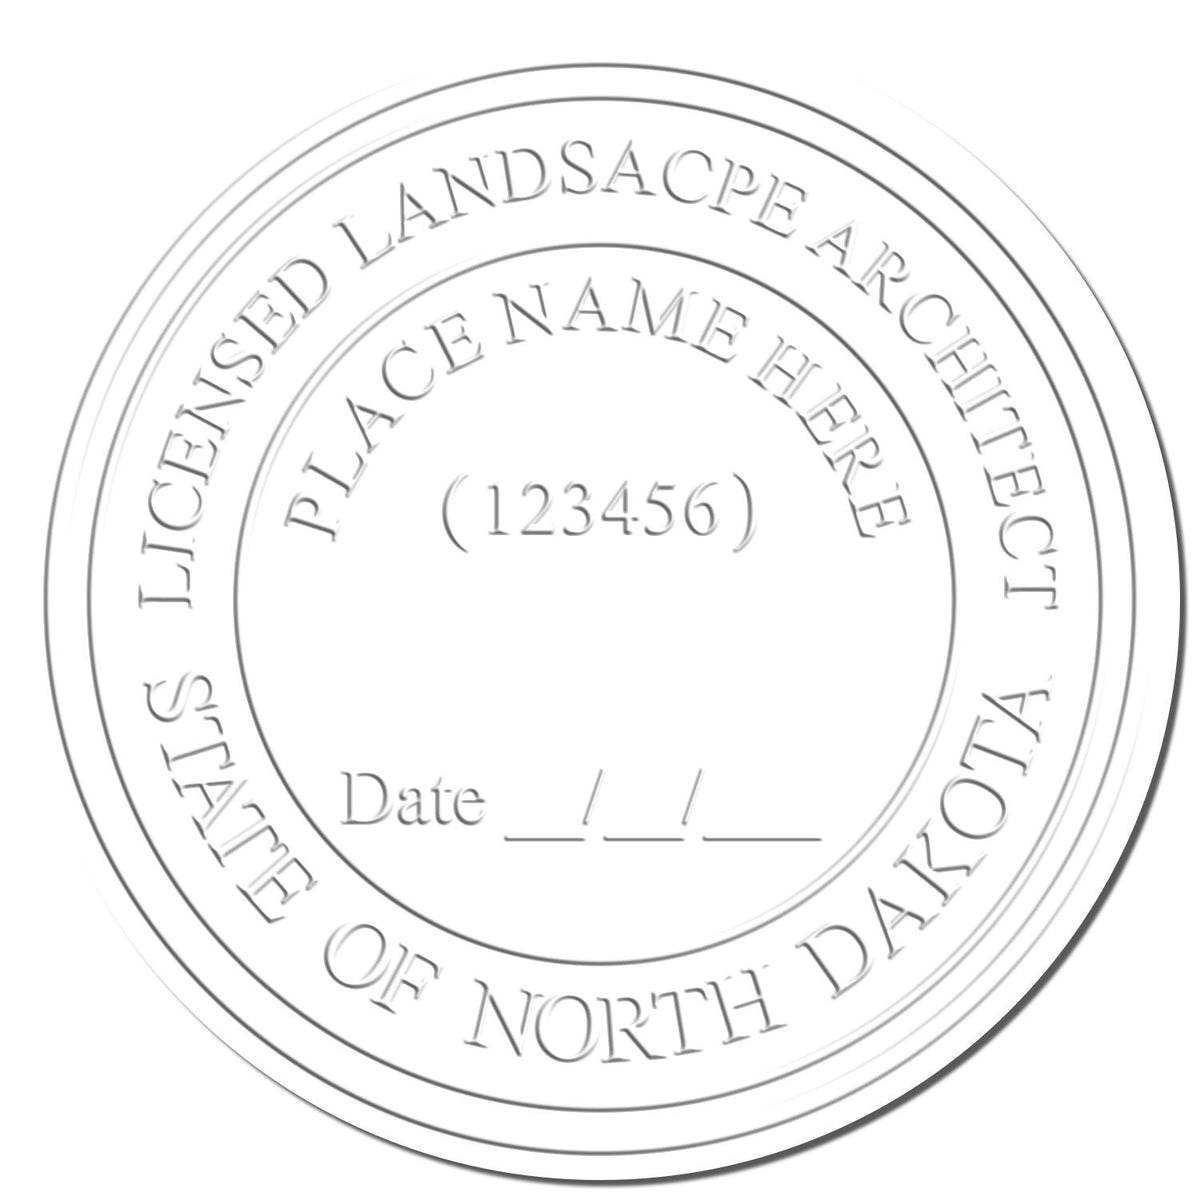 This paper is stamped with a sample imprint of the Hybrid North Dakota Landscape Architect Seal, signifying its quality and reliability.